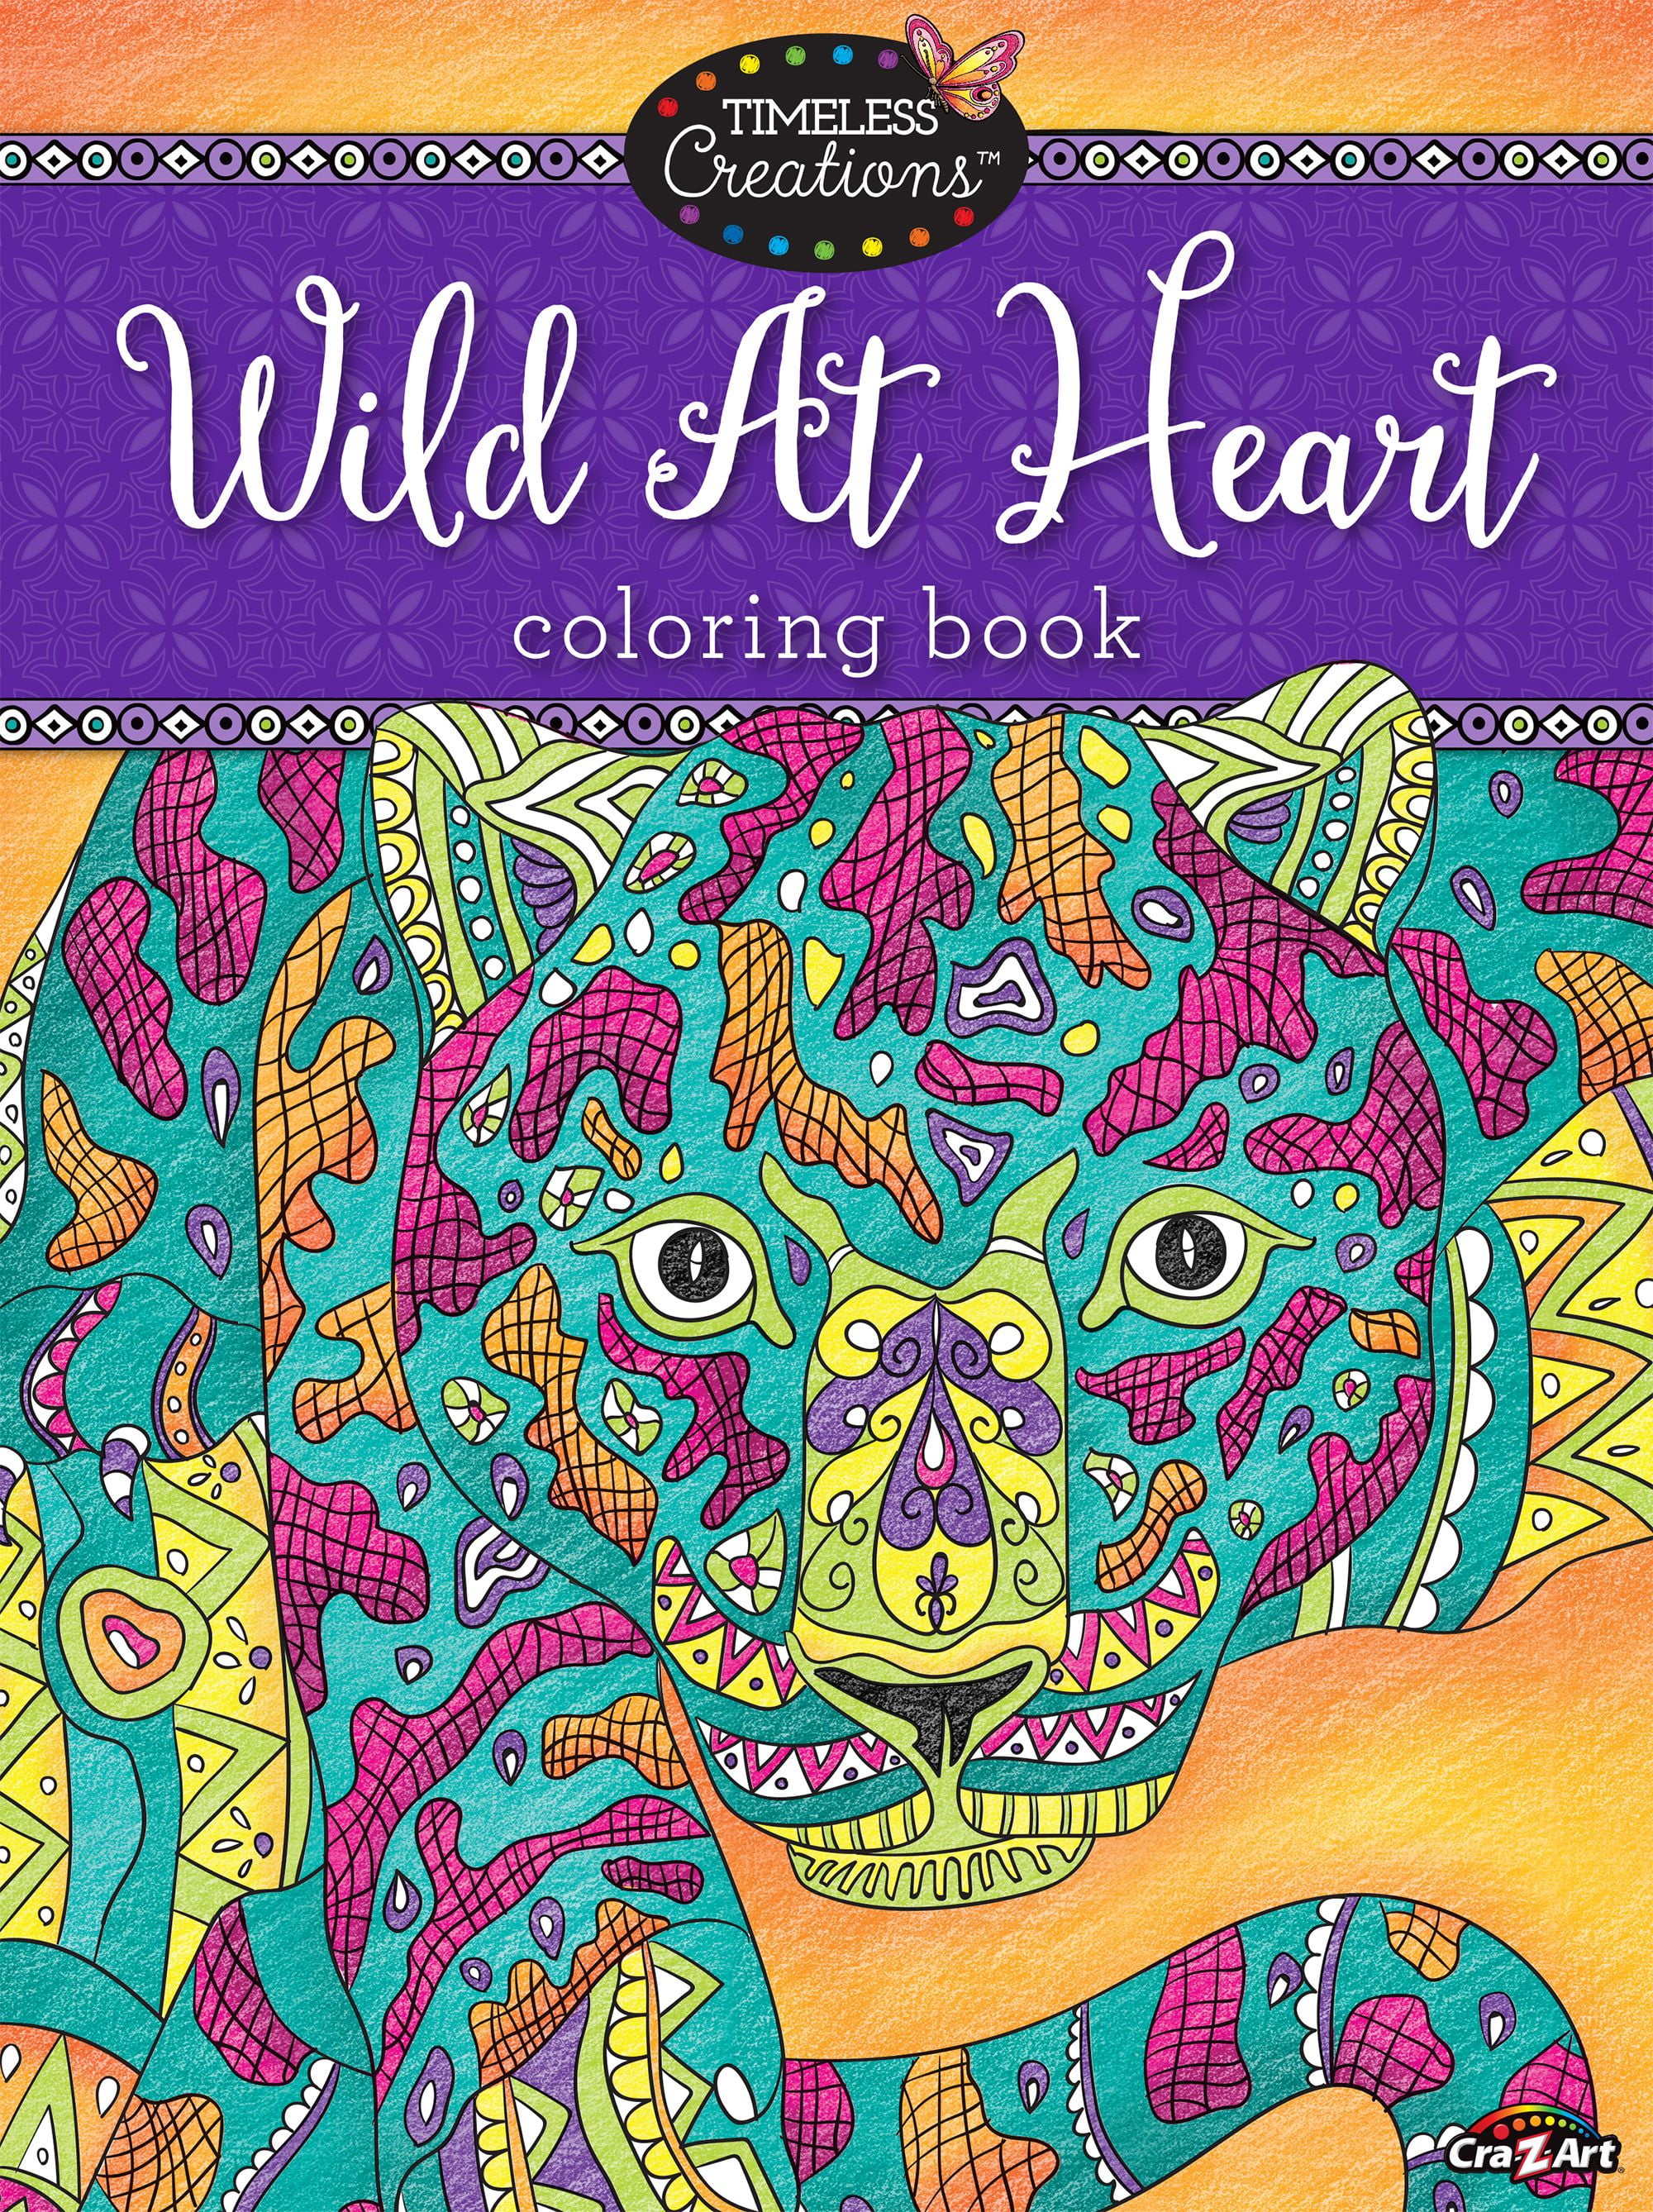 CRA-Z-ART TIMELESS CREATIONS Coloring Book Kids Adults Floral Relax  Creative $22.50 - PicClick